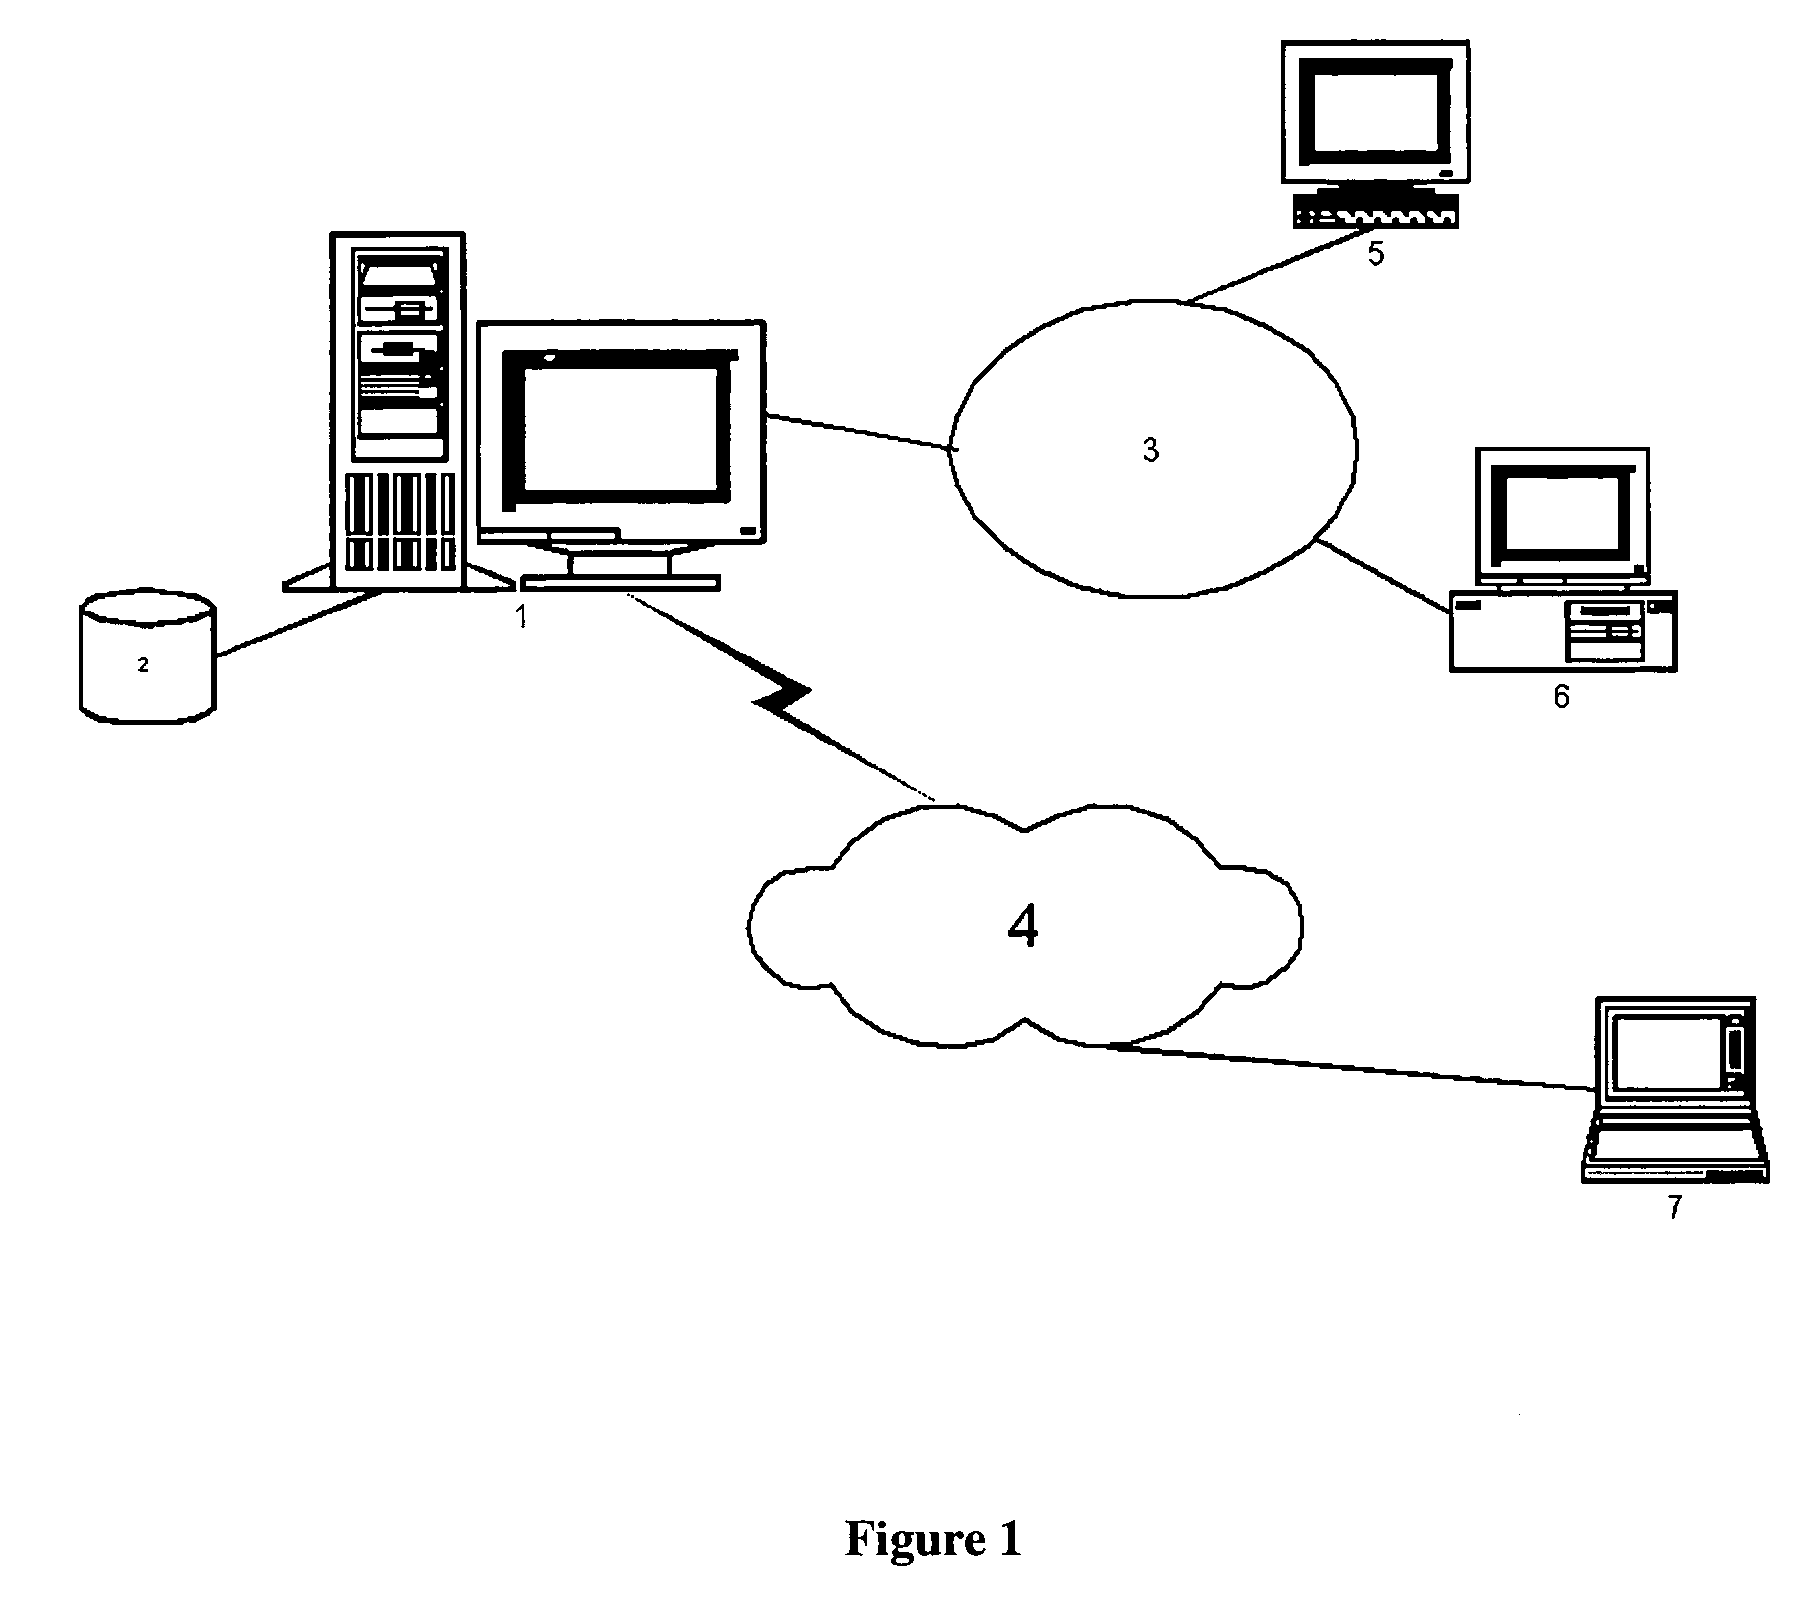 Systems and methods for real-time network-based vulnerability assessment